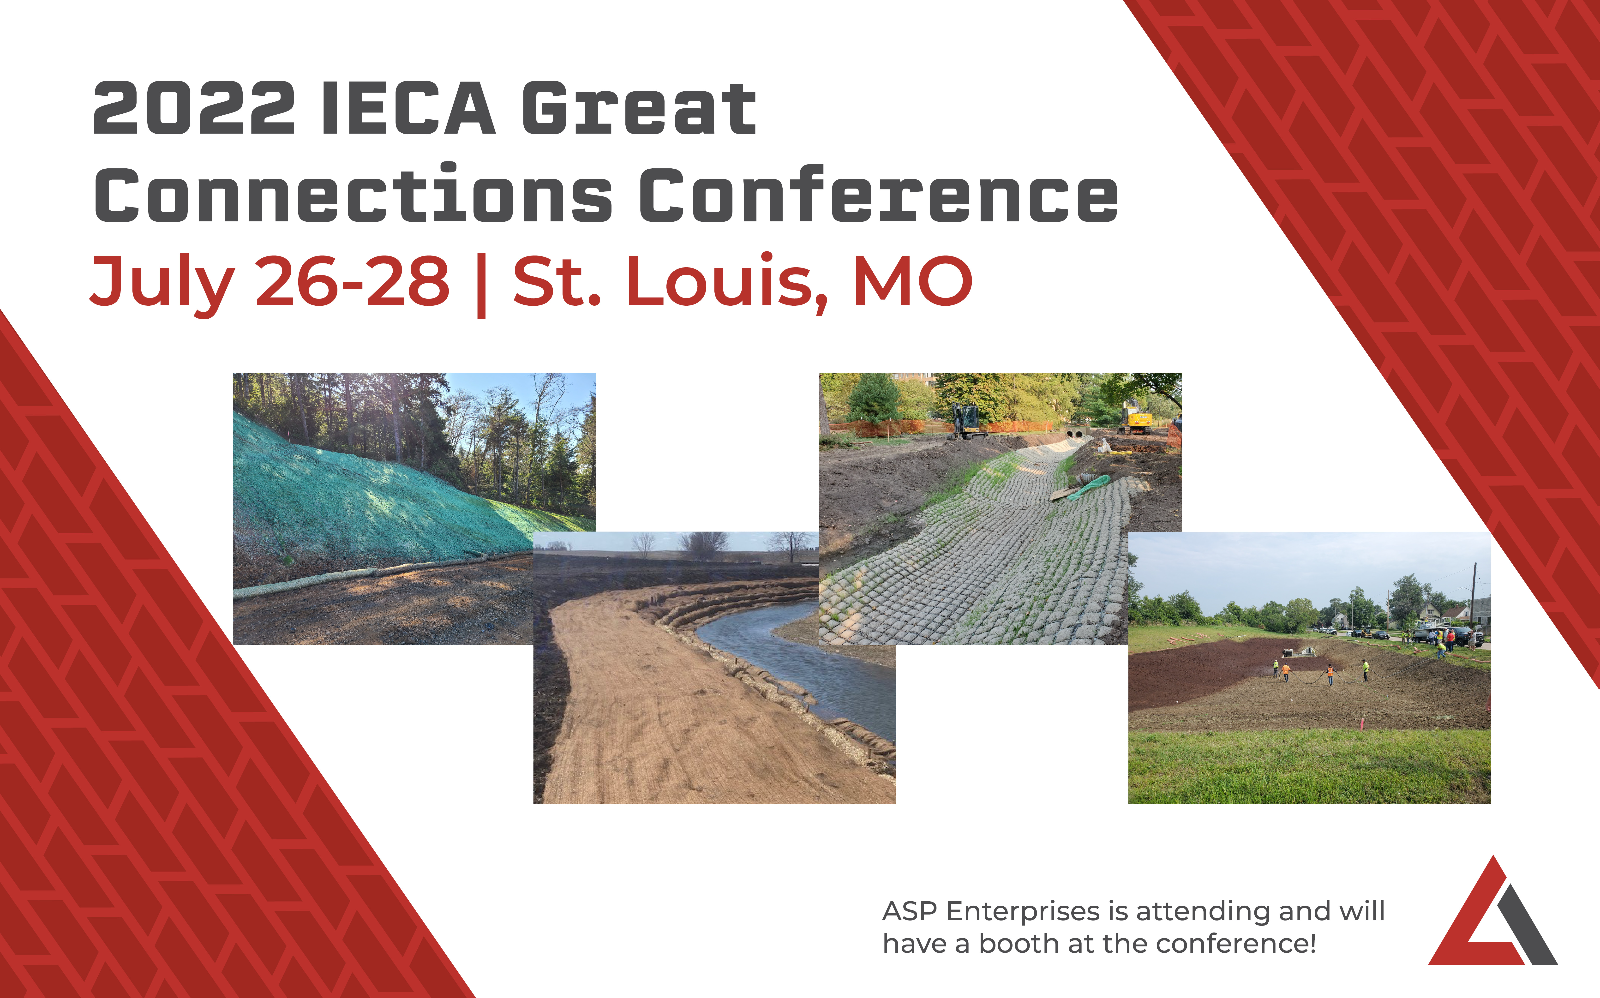 ASP is Attending the 2022 IECA Great Connections Conference